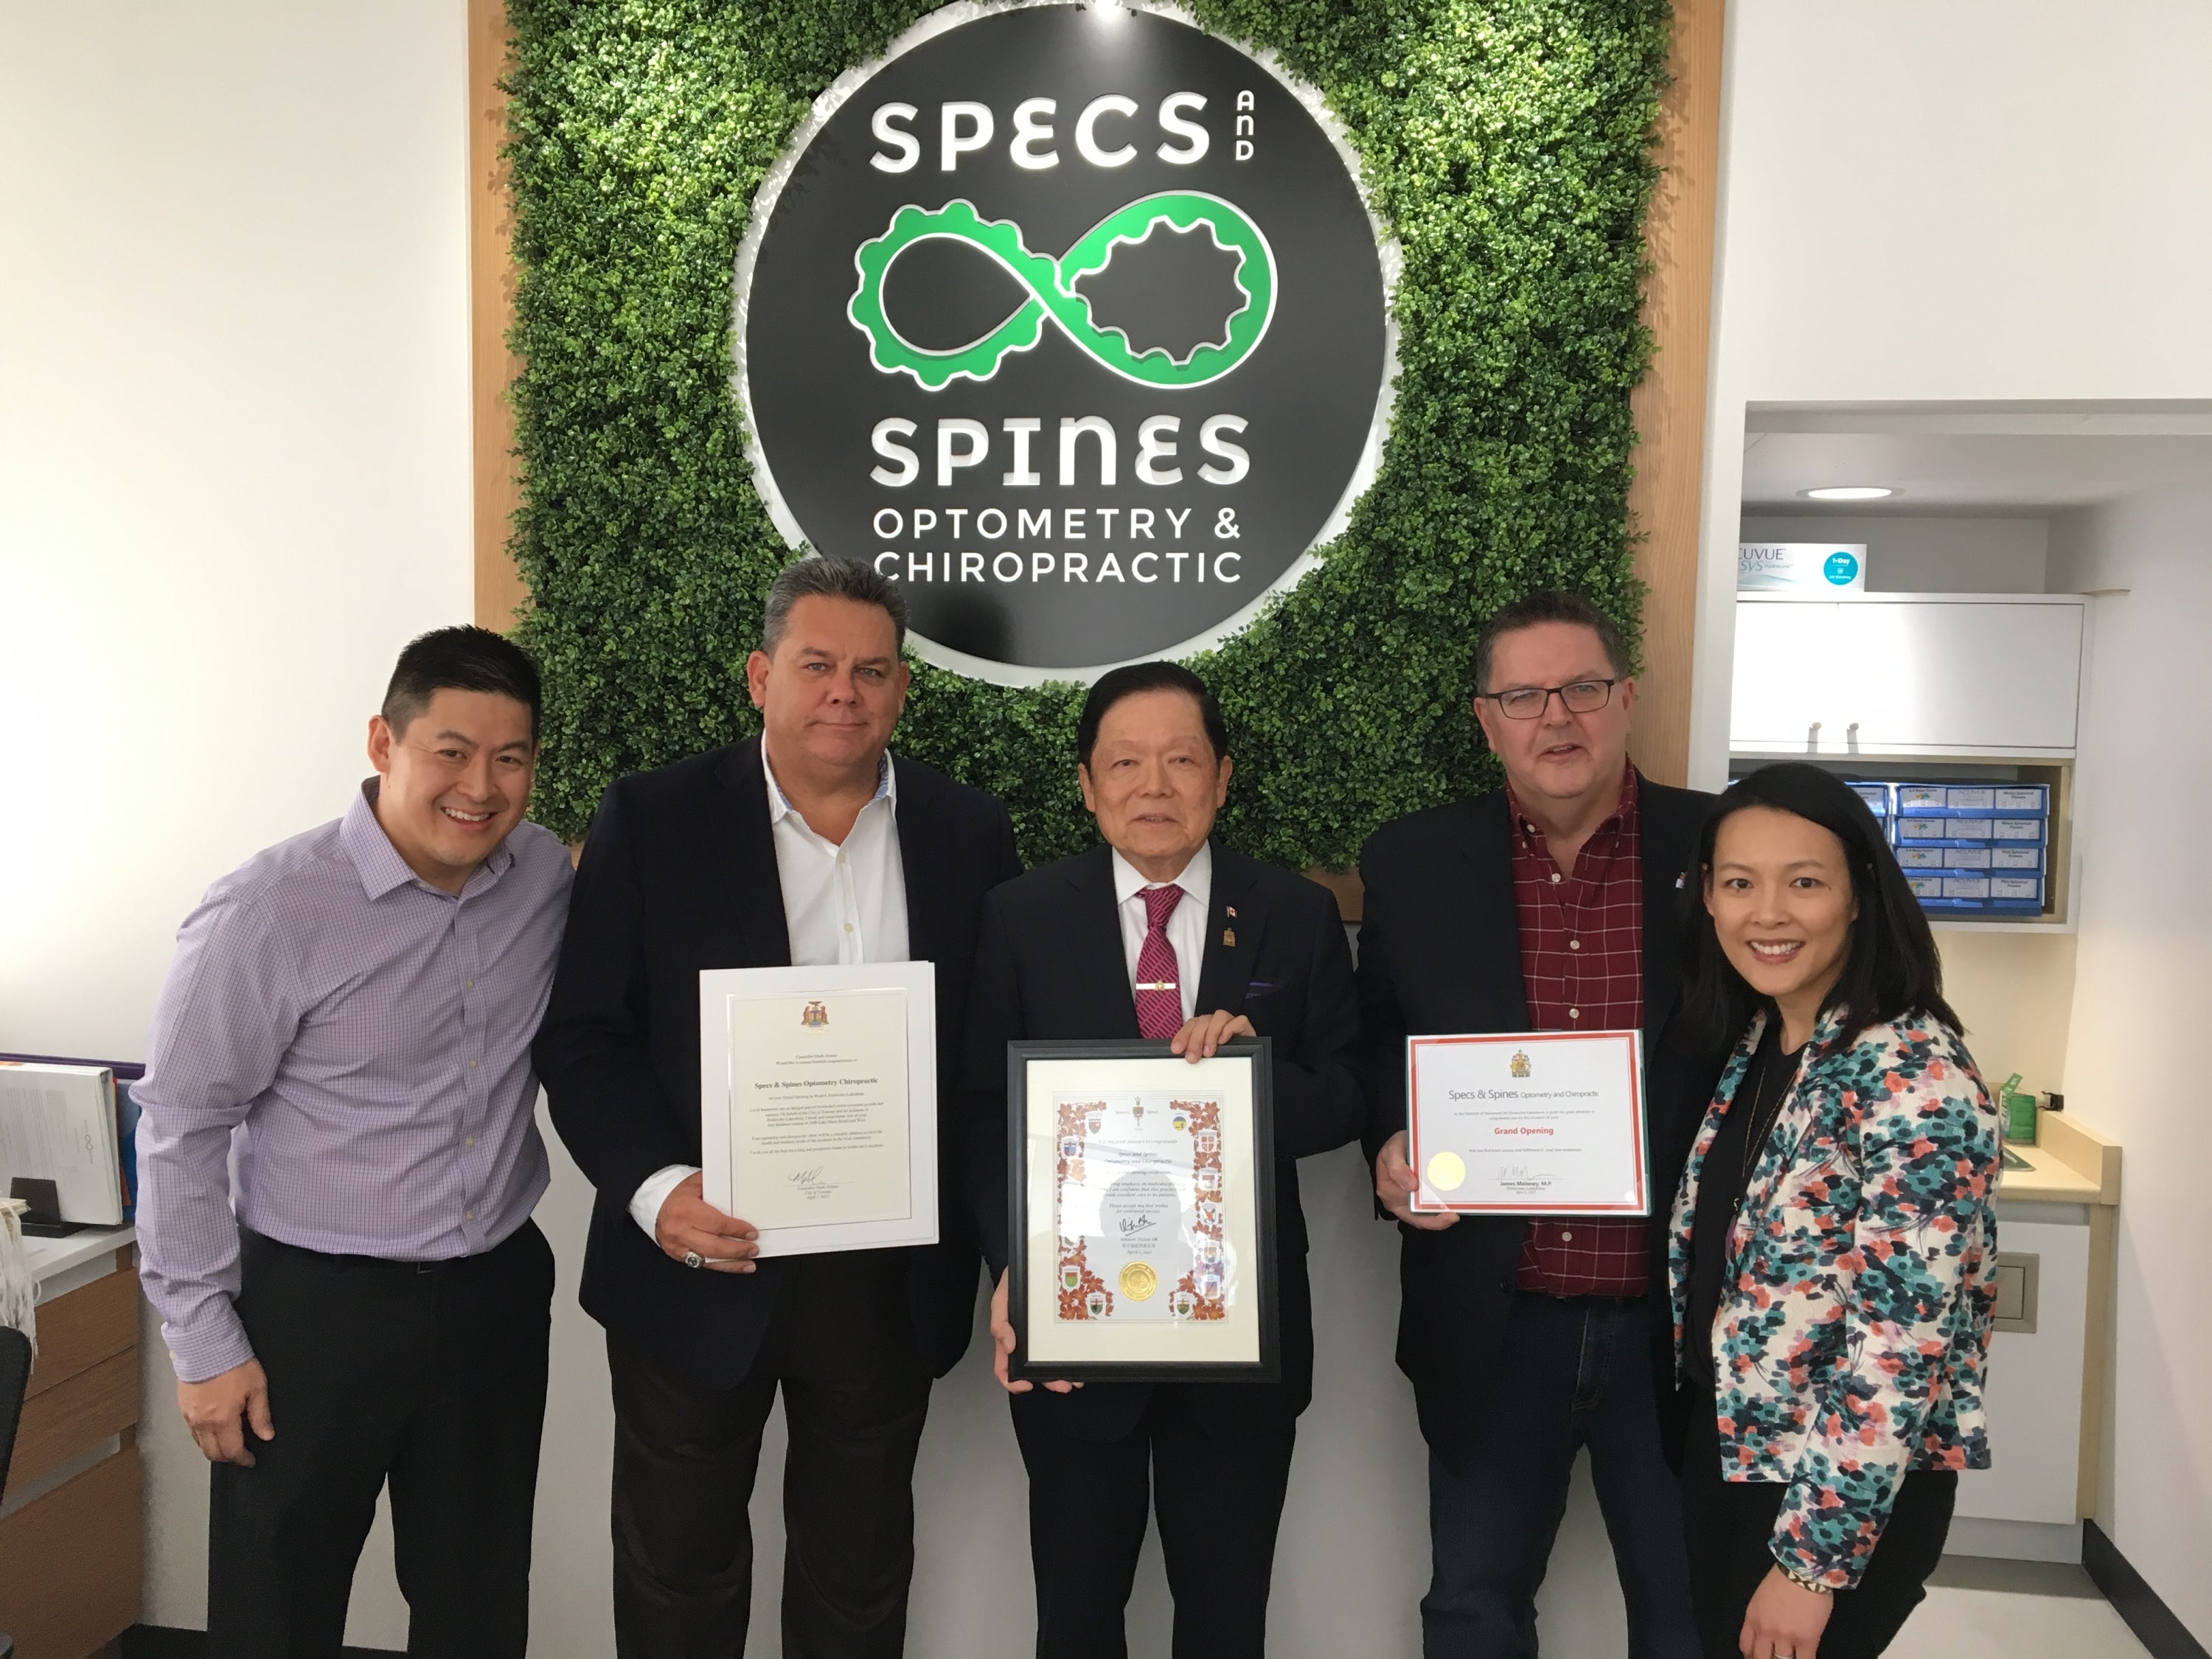 Specs & Spines Grand Opening